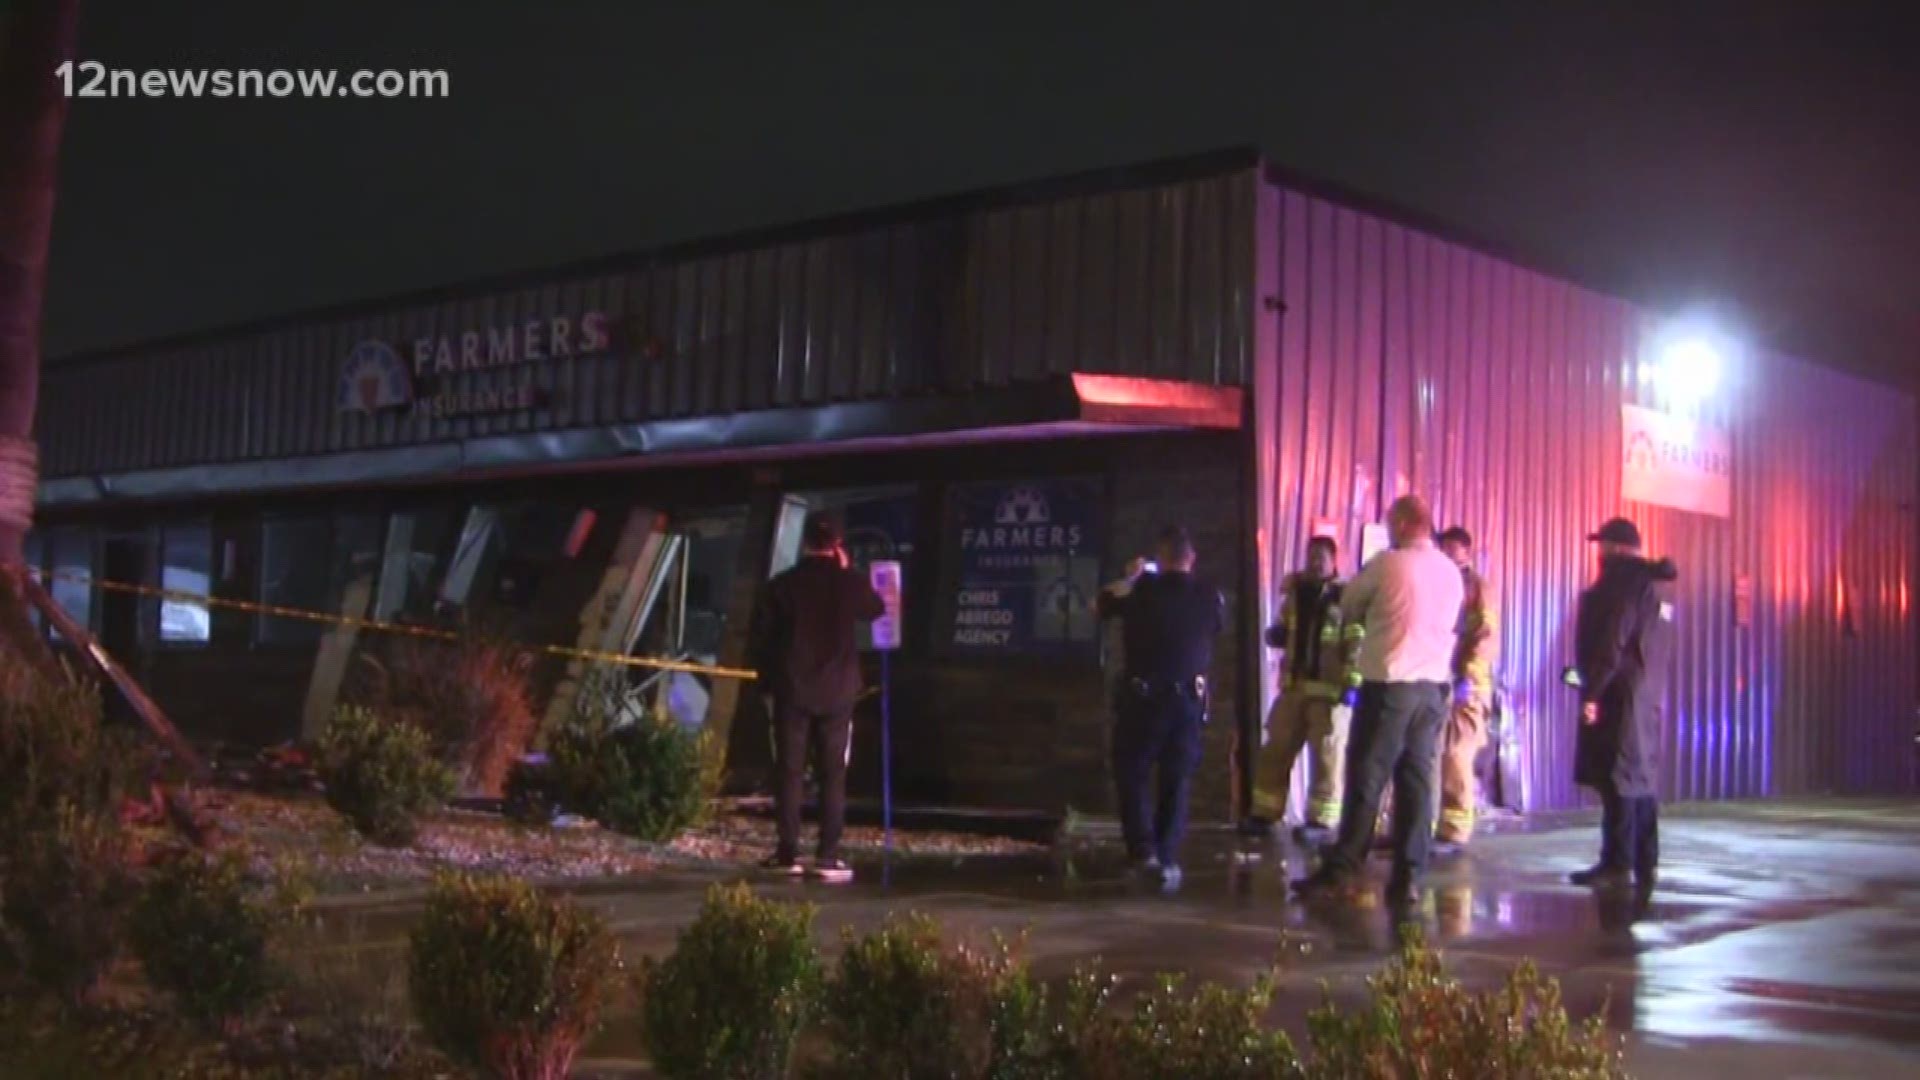 The accident happened before 11 p.m. Saturday, Feb. 15. A man is recovering after investigators say he crashed a car into the front of a building in Port Neches.